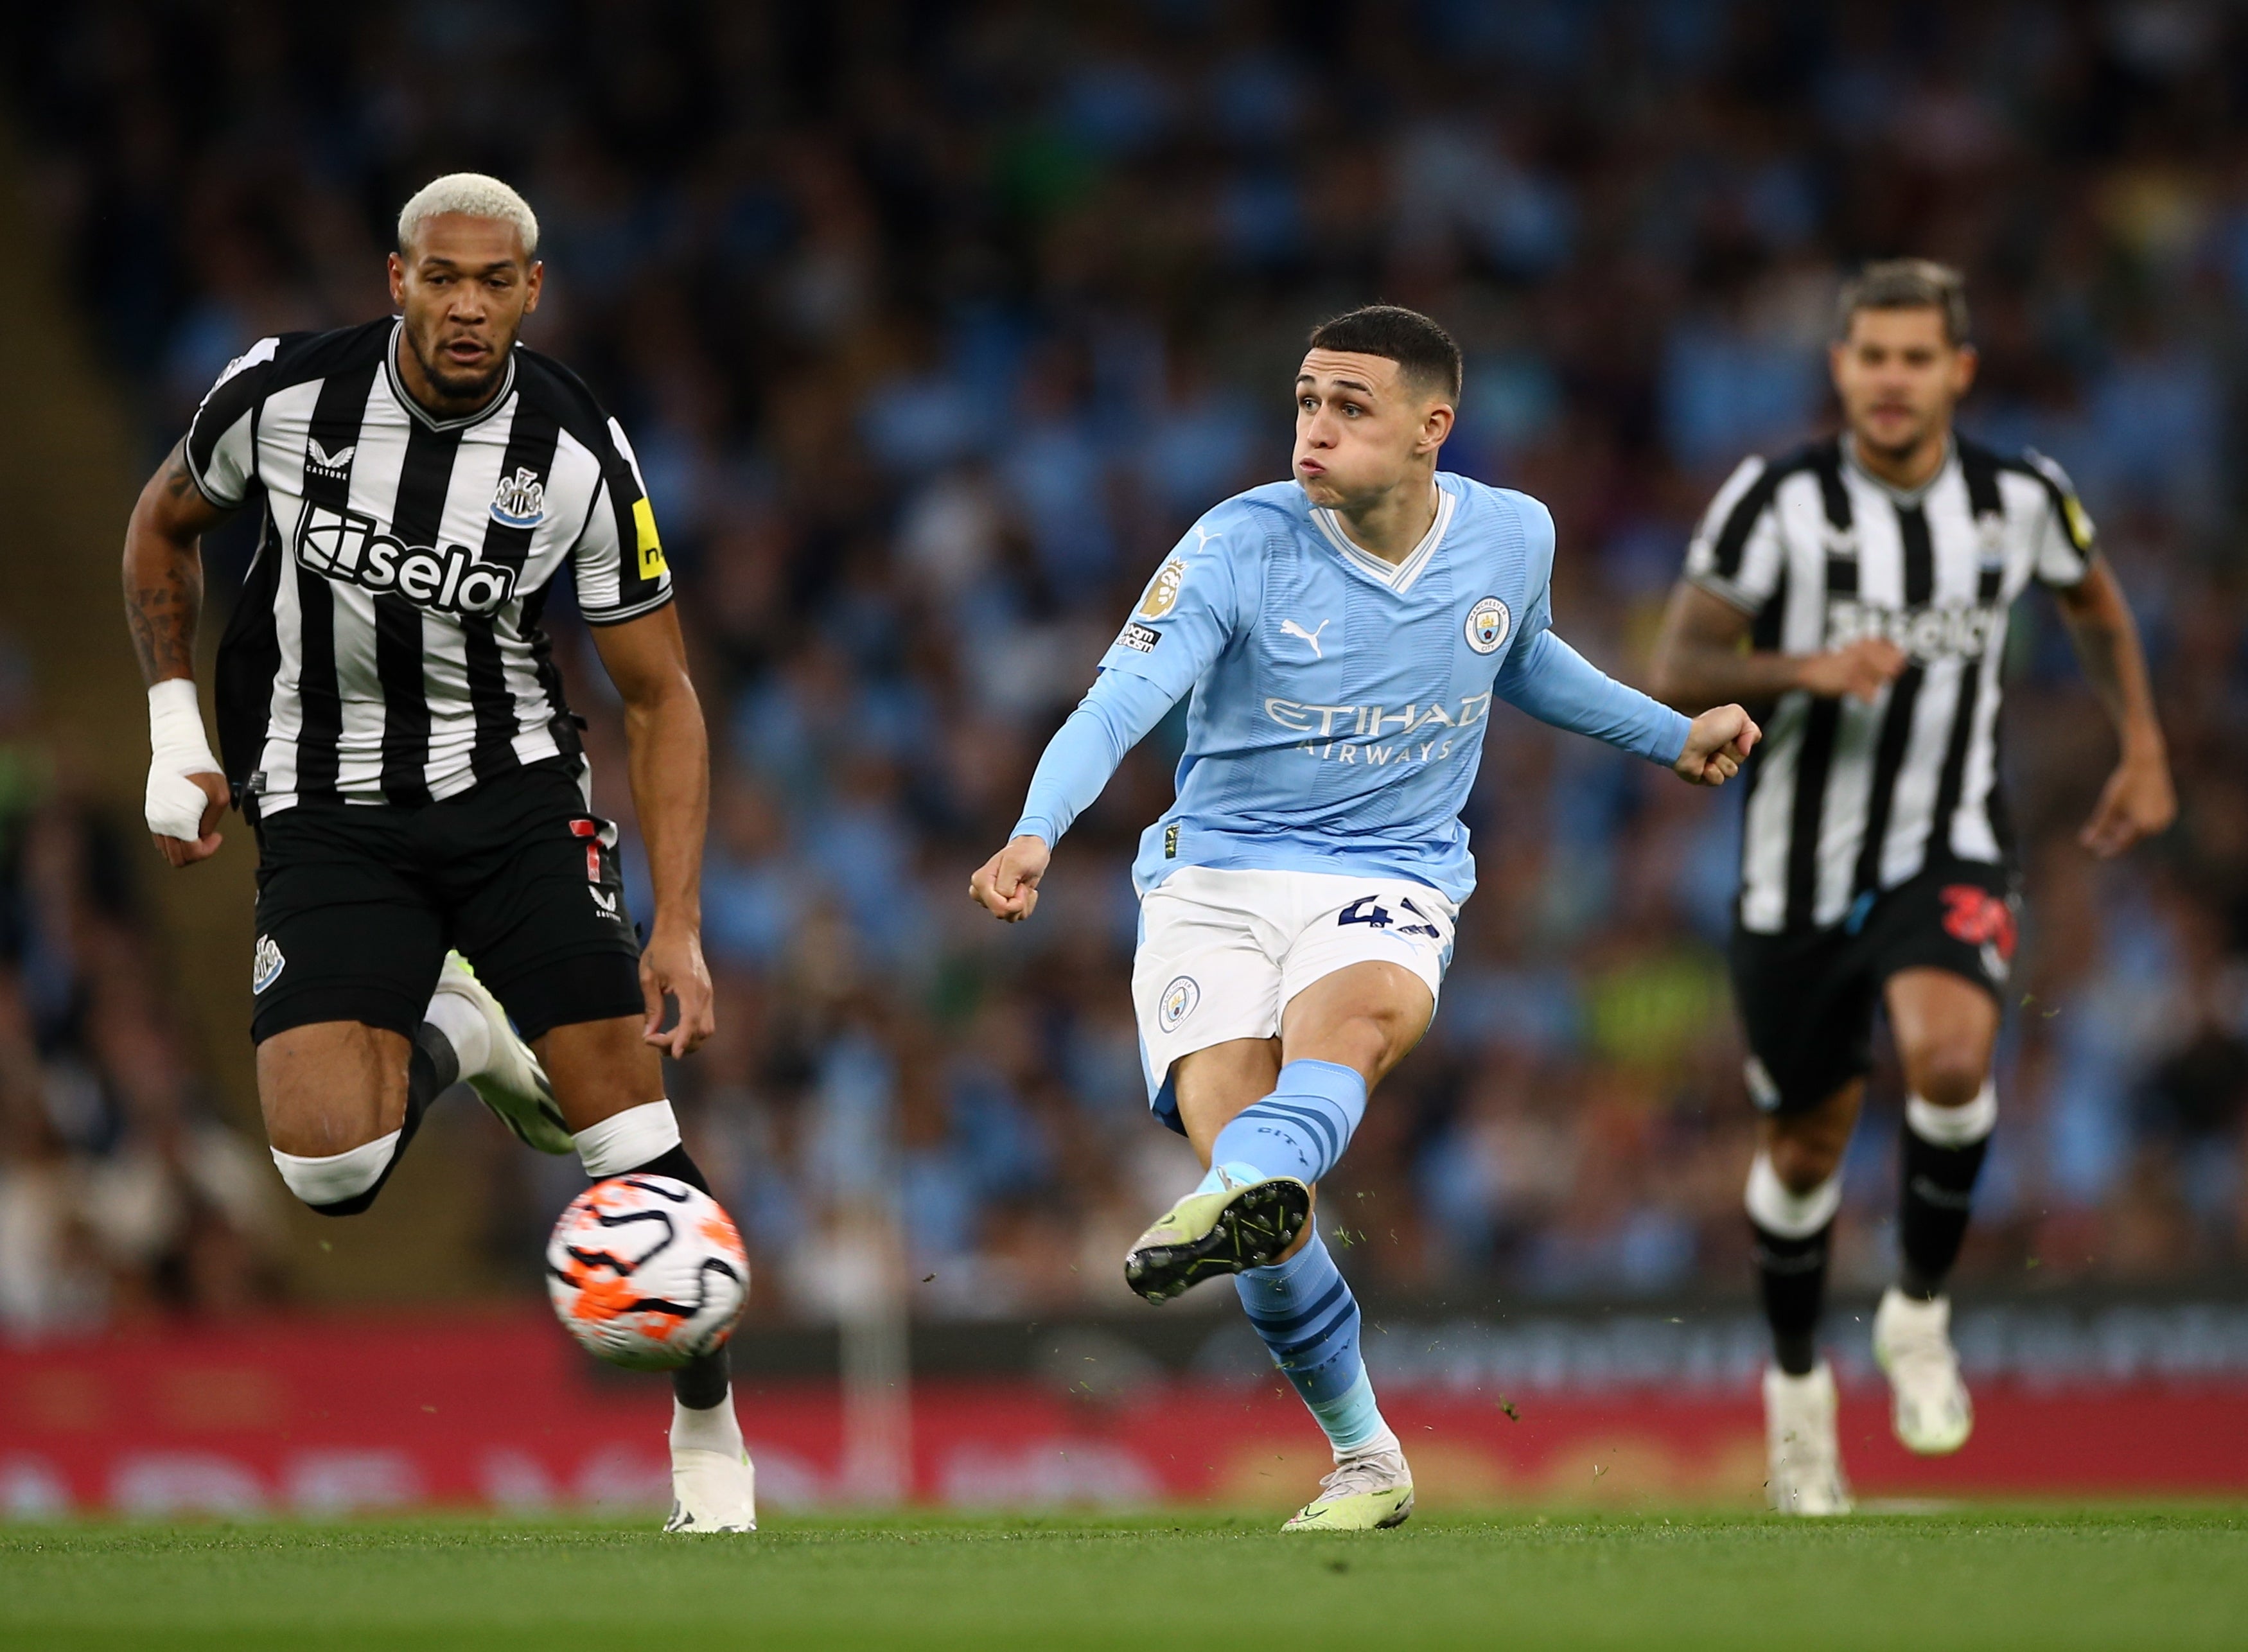 Foden was electric against Newcastle